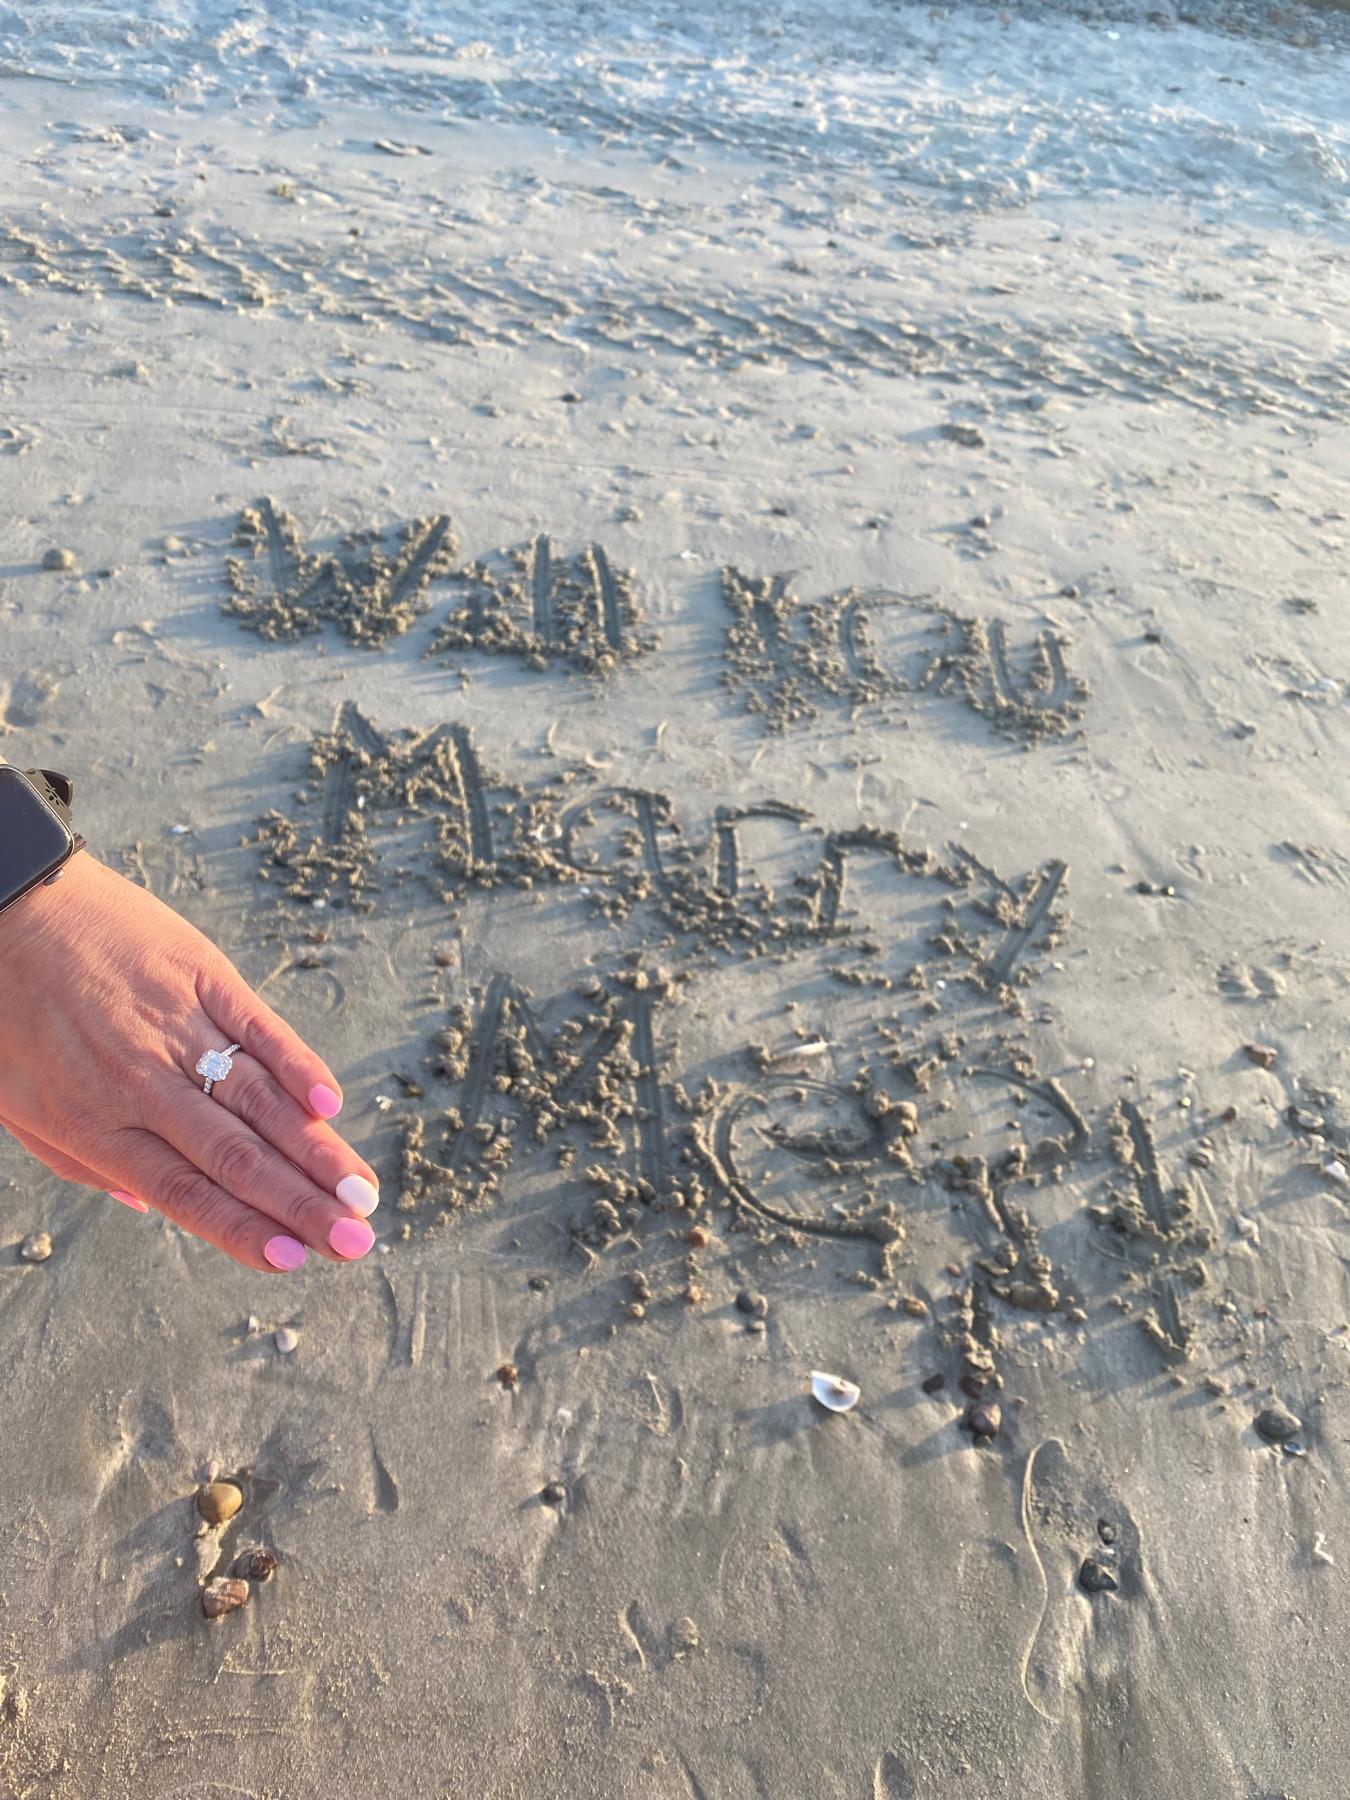 Alyssa surprised Mj by taking her and the kids to Nantasket beach and asking her to marry her by writing it in the sand!…spoiler alert, she said yes!